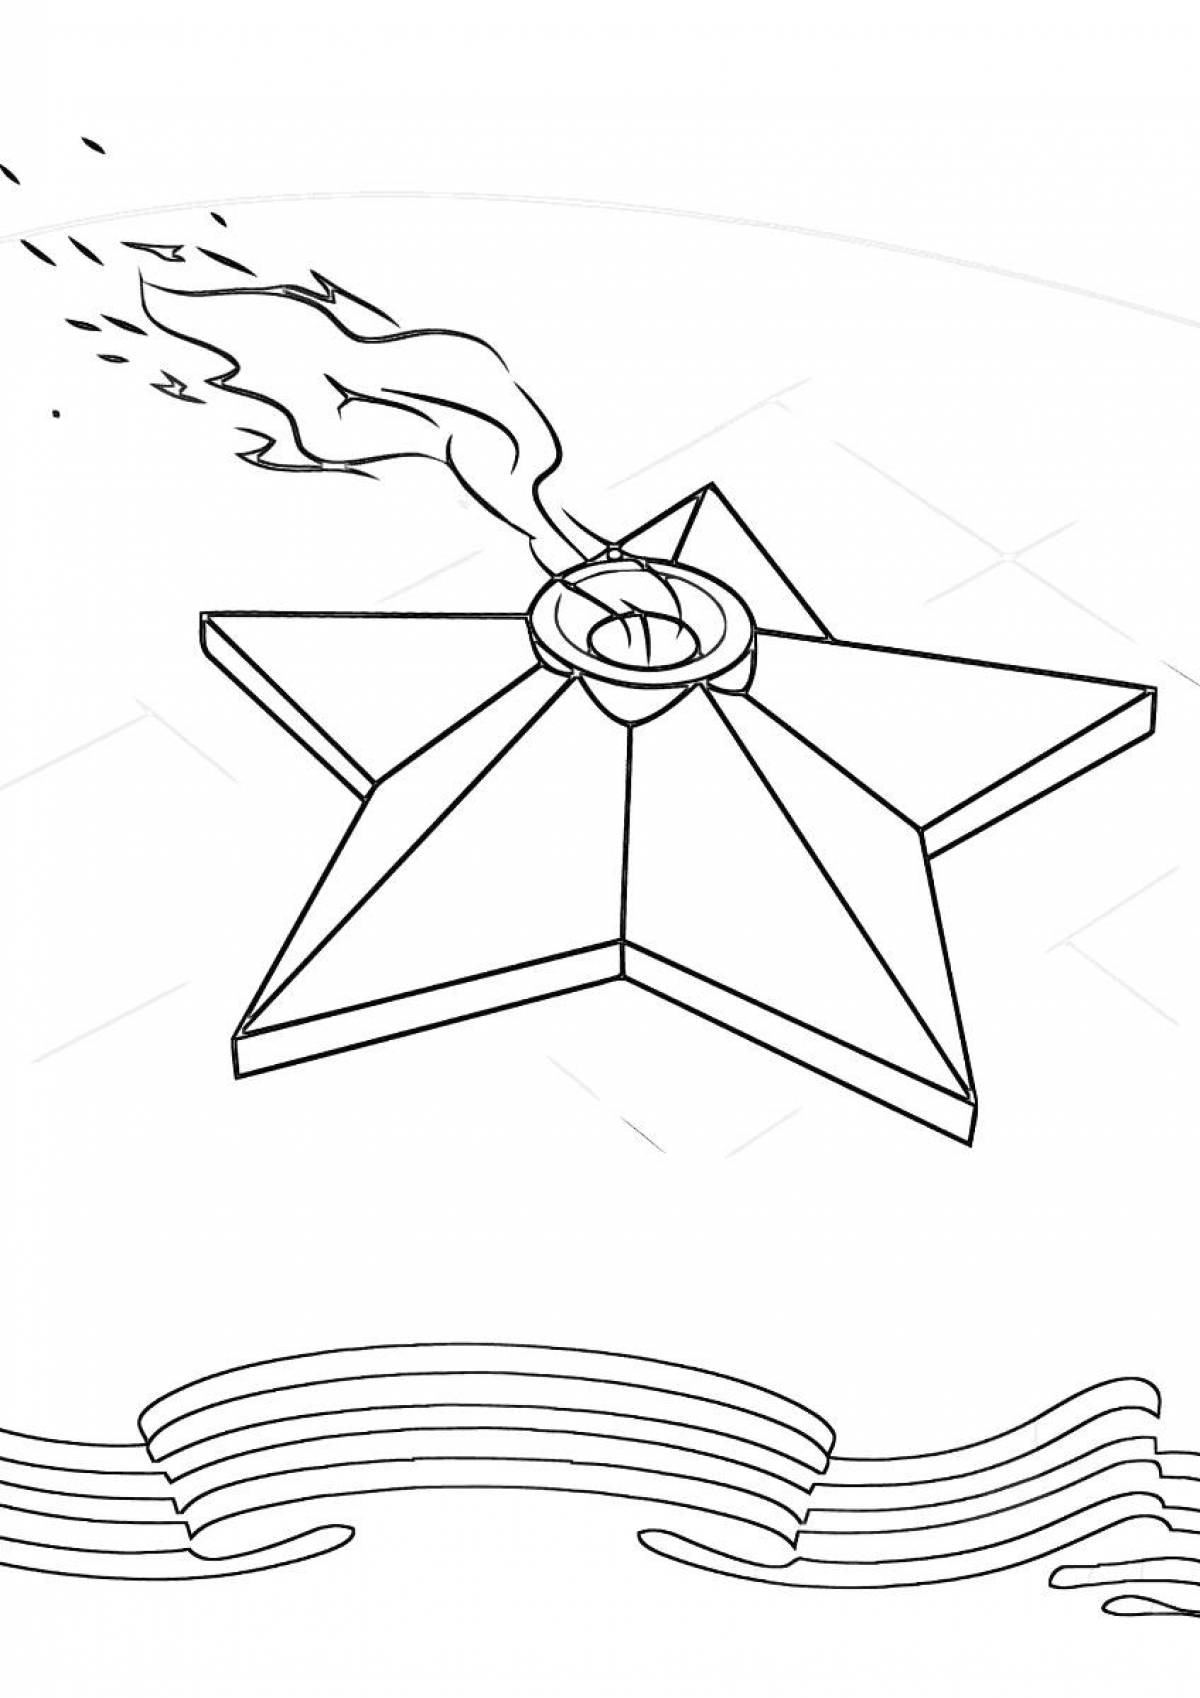 Artistically colored eternal flame coloring page for kids